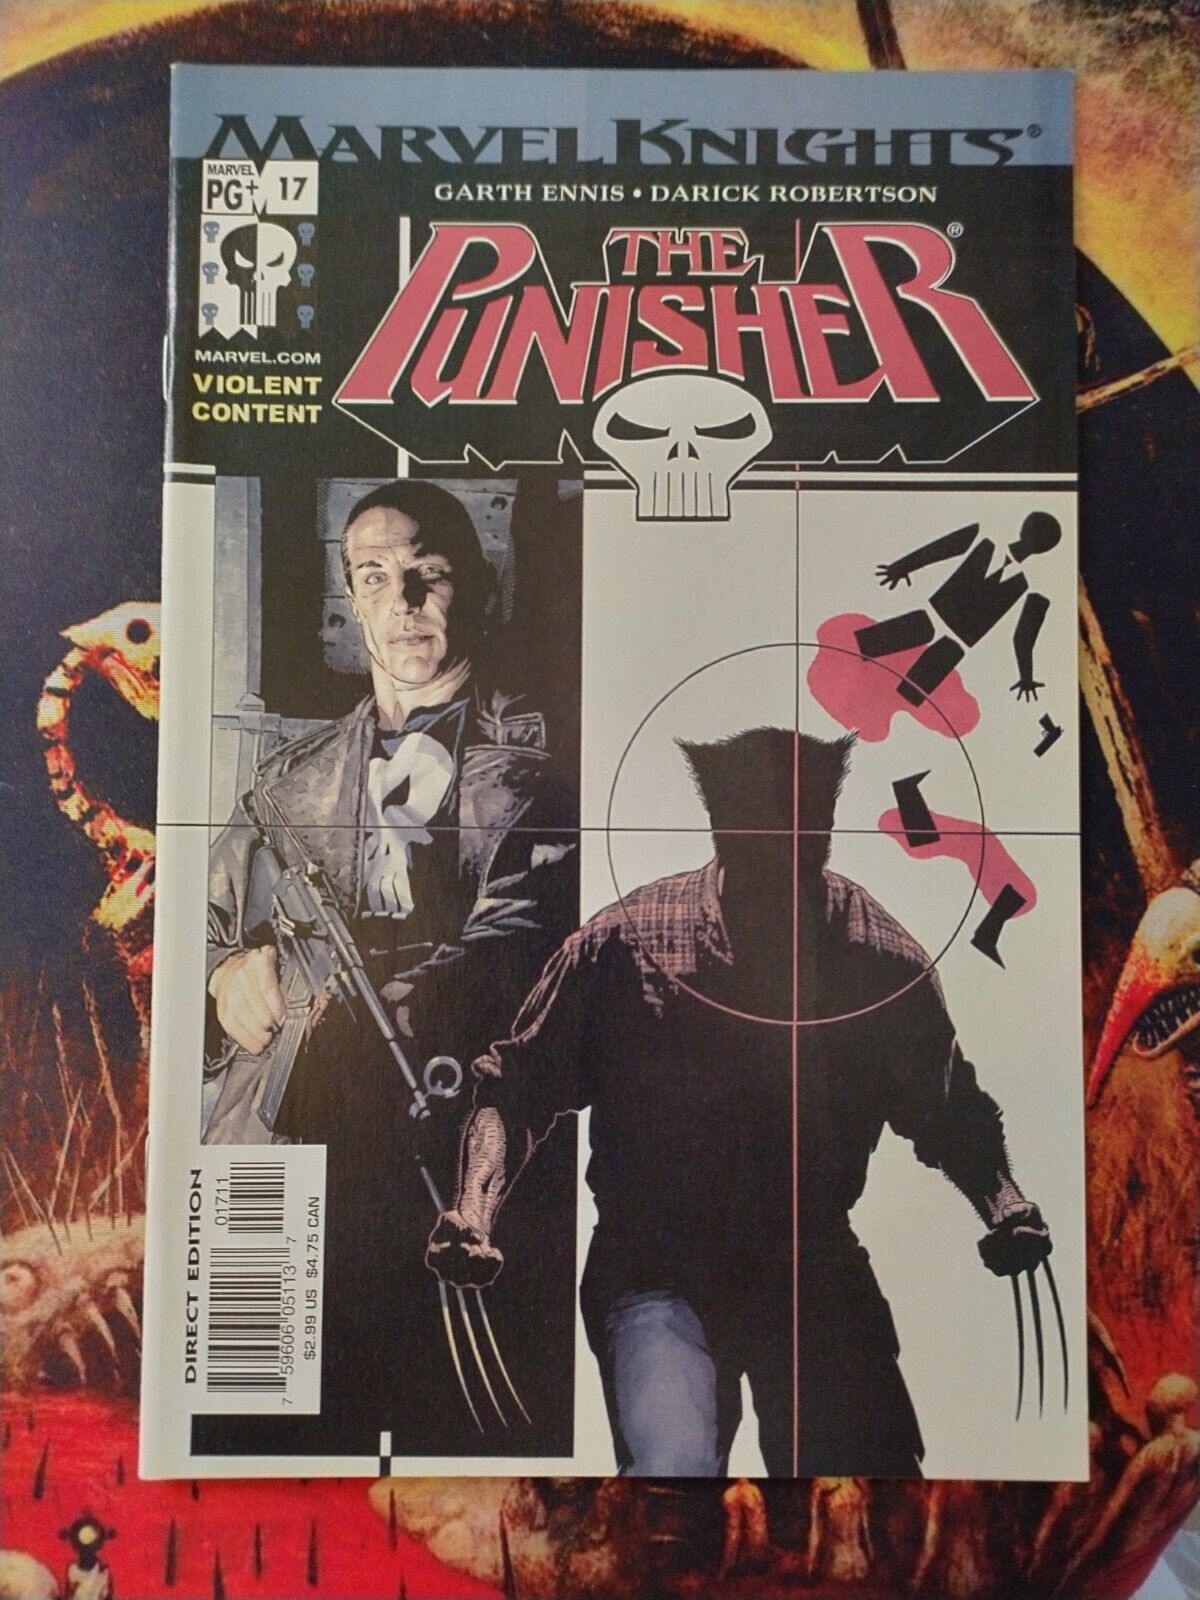 The Punisher #17 Marvel Knights 2002